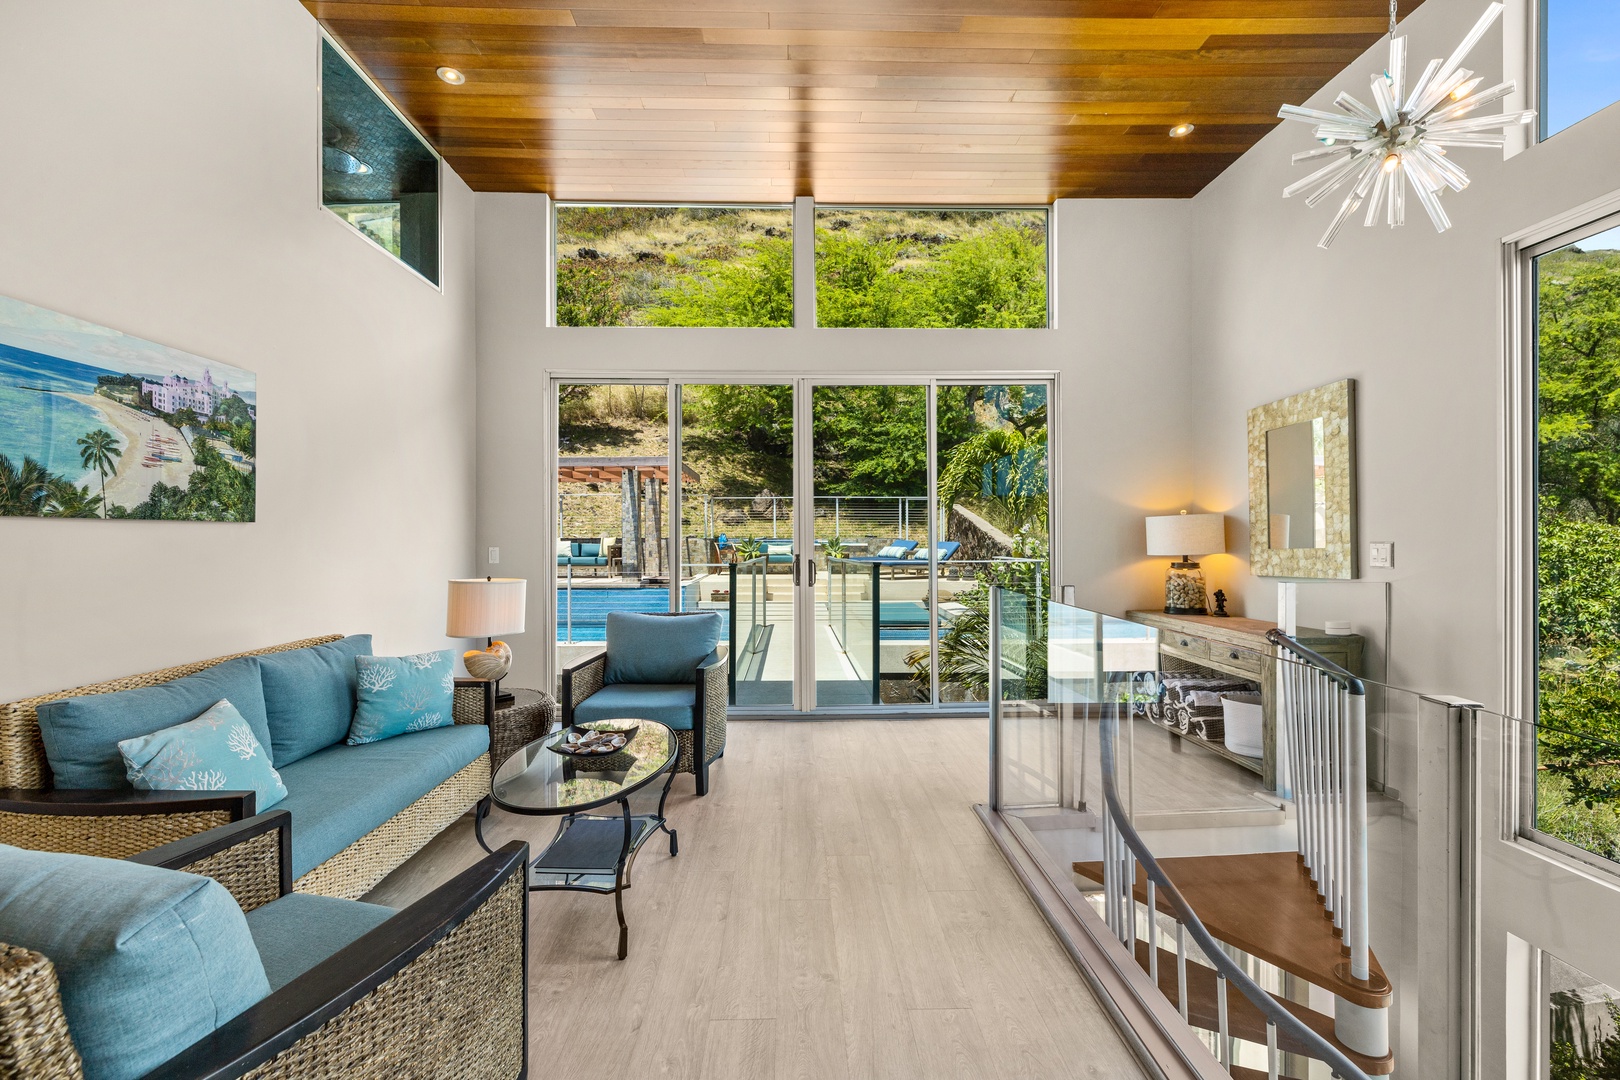 Honolulu Vacation Rentals, Villa Luana - Additional seating area at the top of the spiral stairs, opening to the pool.